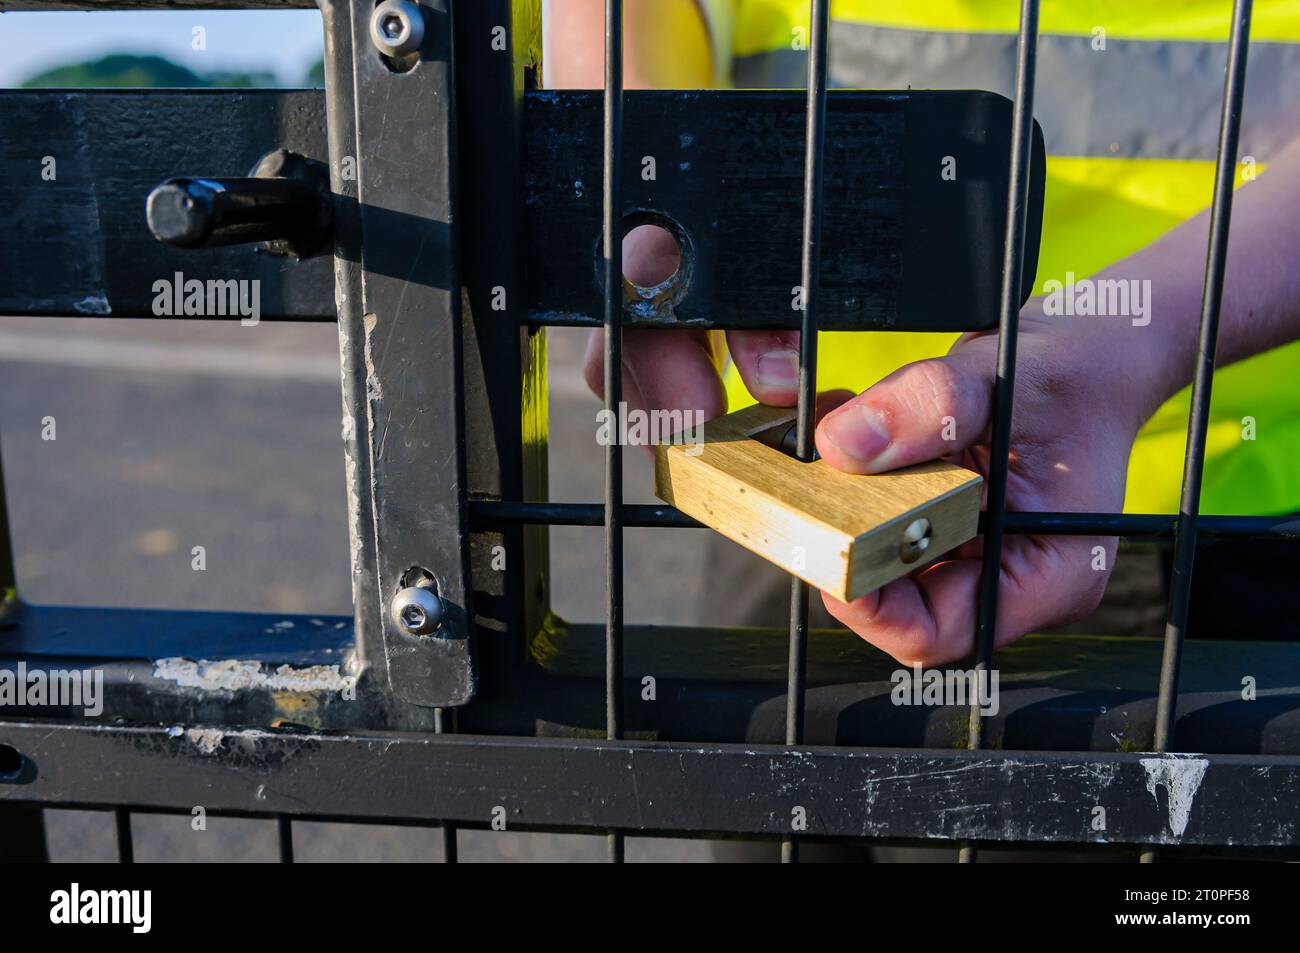 A security guard attaches a lock to a gate after unlocking the bolt Stock Photo